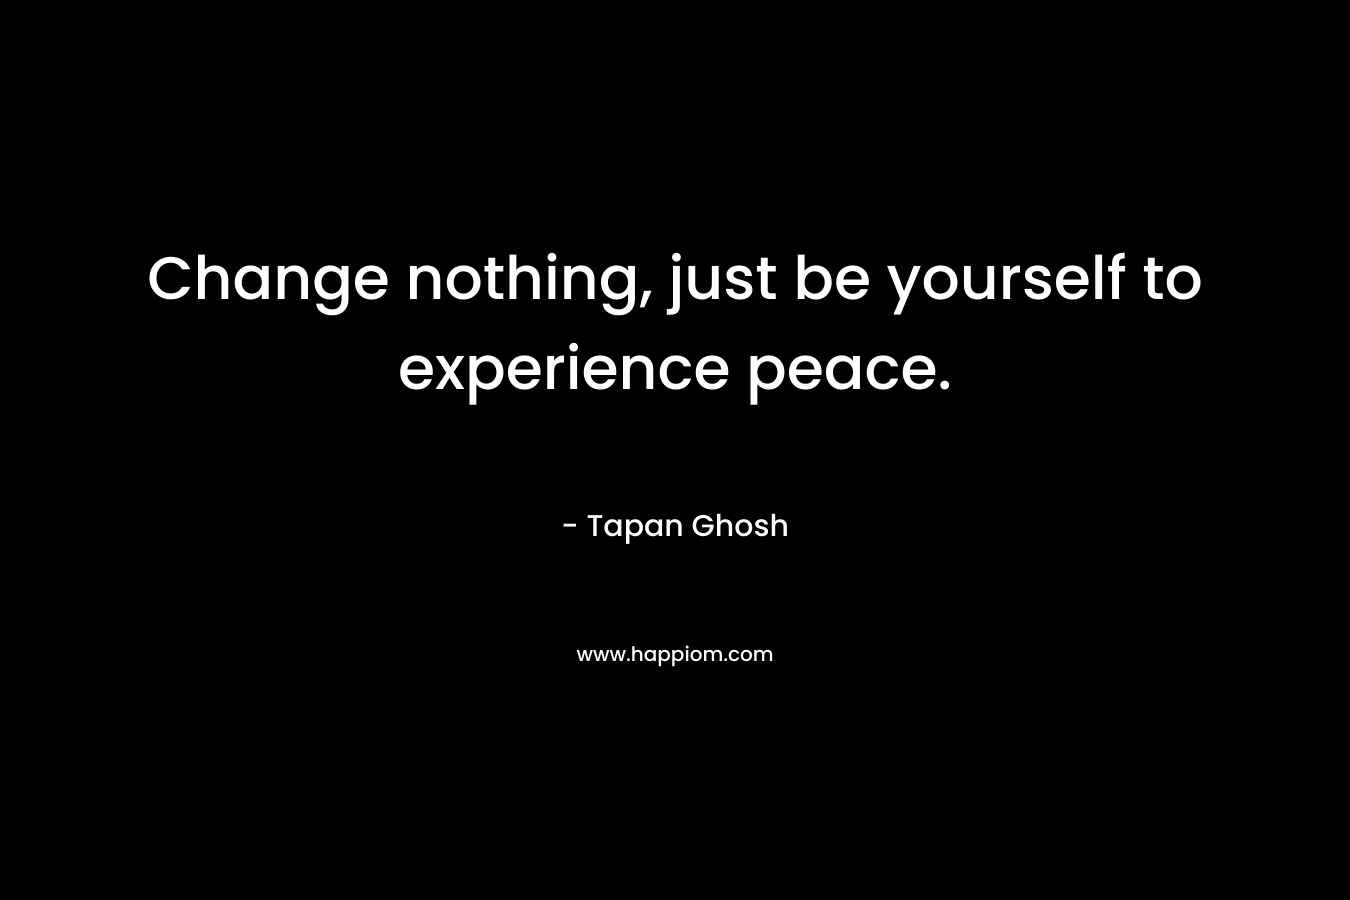 Change nothing, just be yourself to experience peace. – Tapan Ghosh